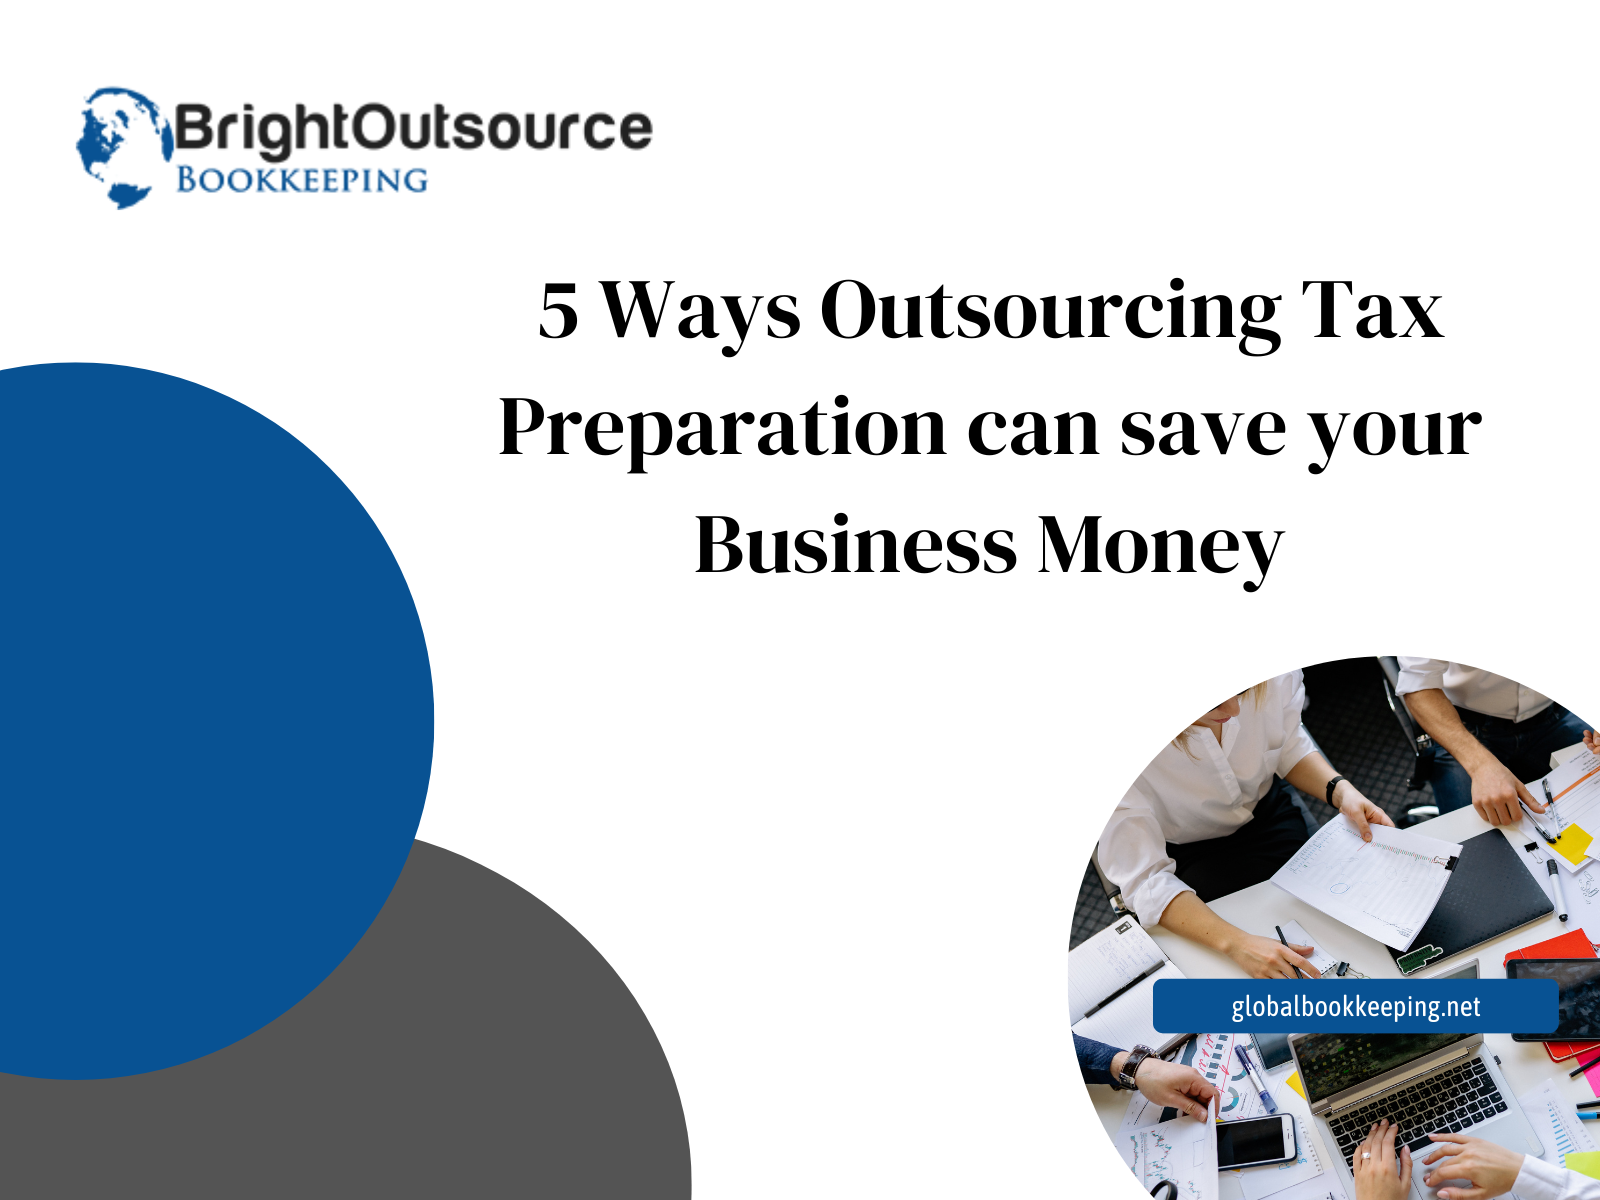 5 Ways Outsourcing Tax Preparation can save your Business Money